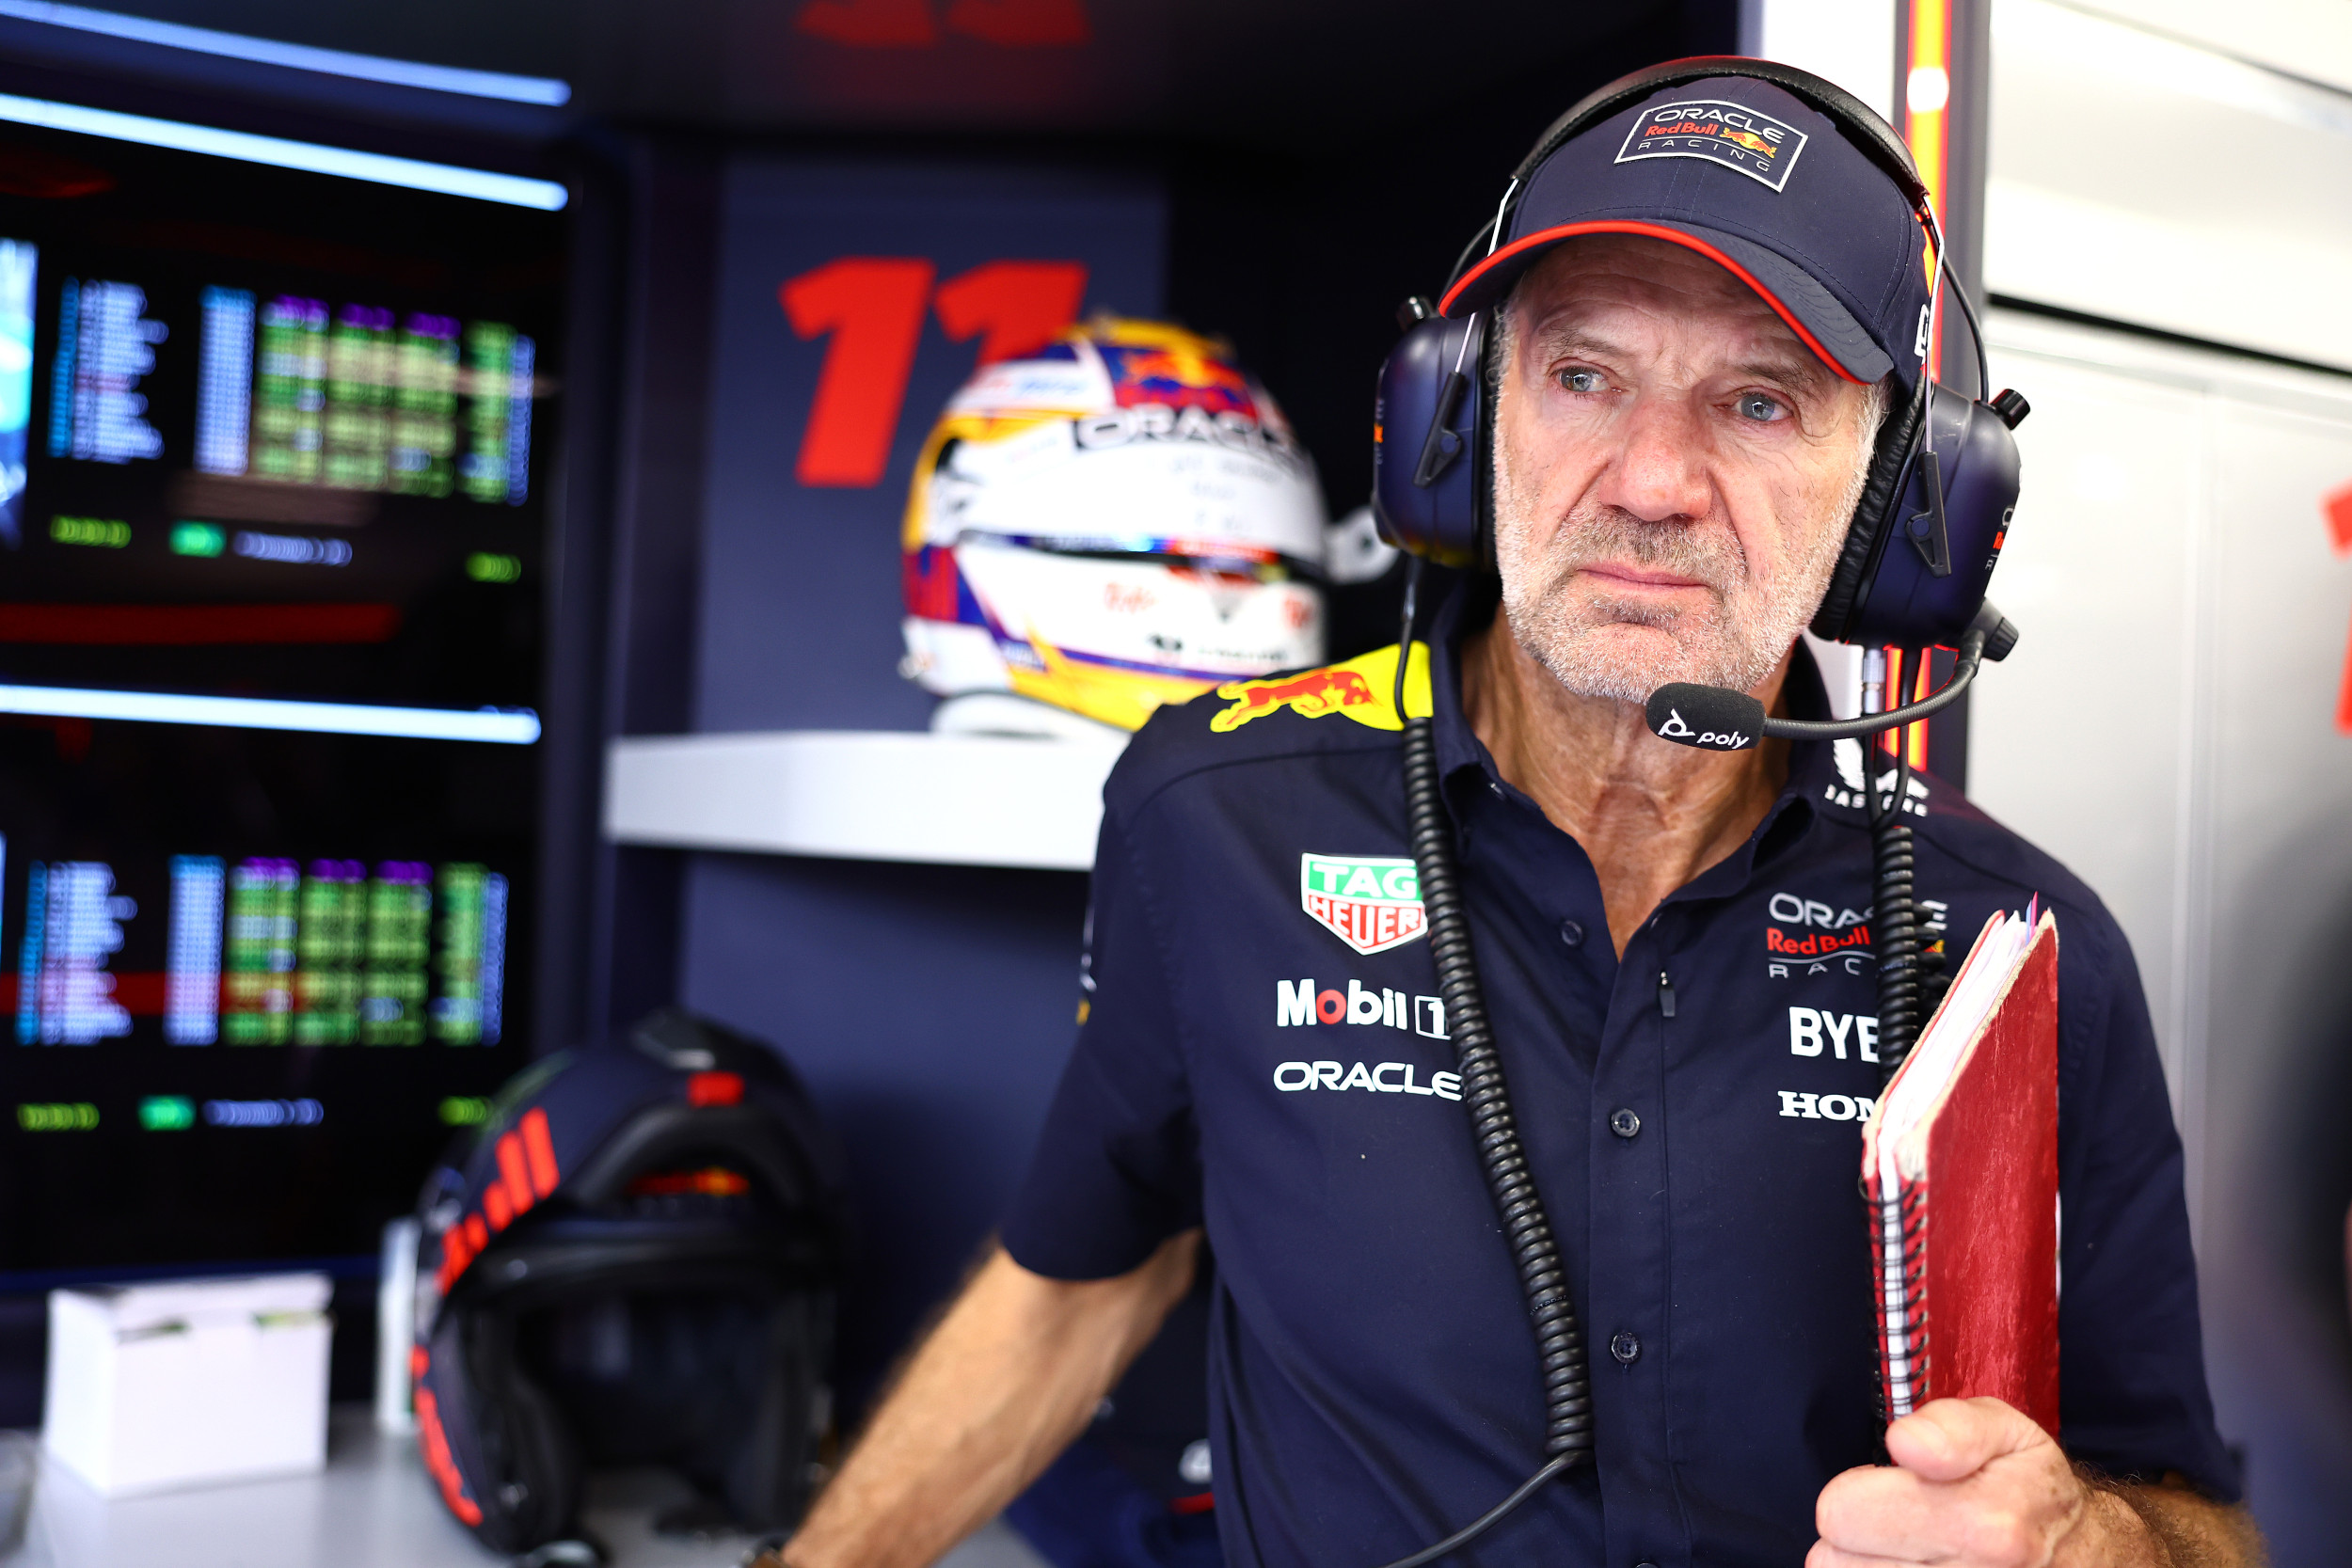 Aston Martin confirms they are not stealing Adrian Newey from Red Bull